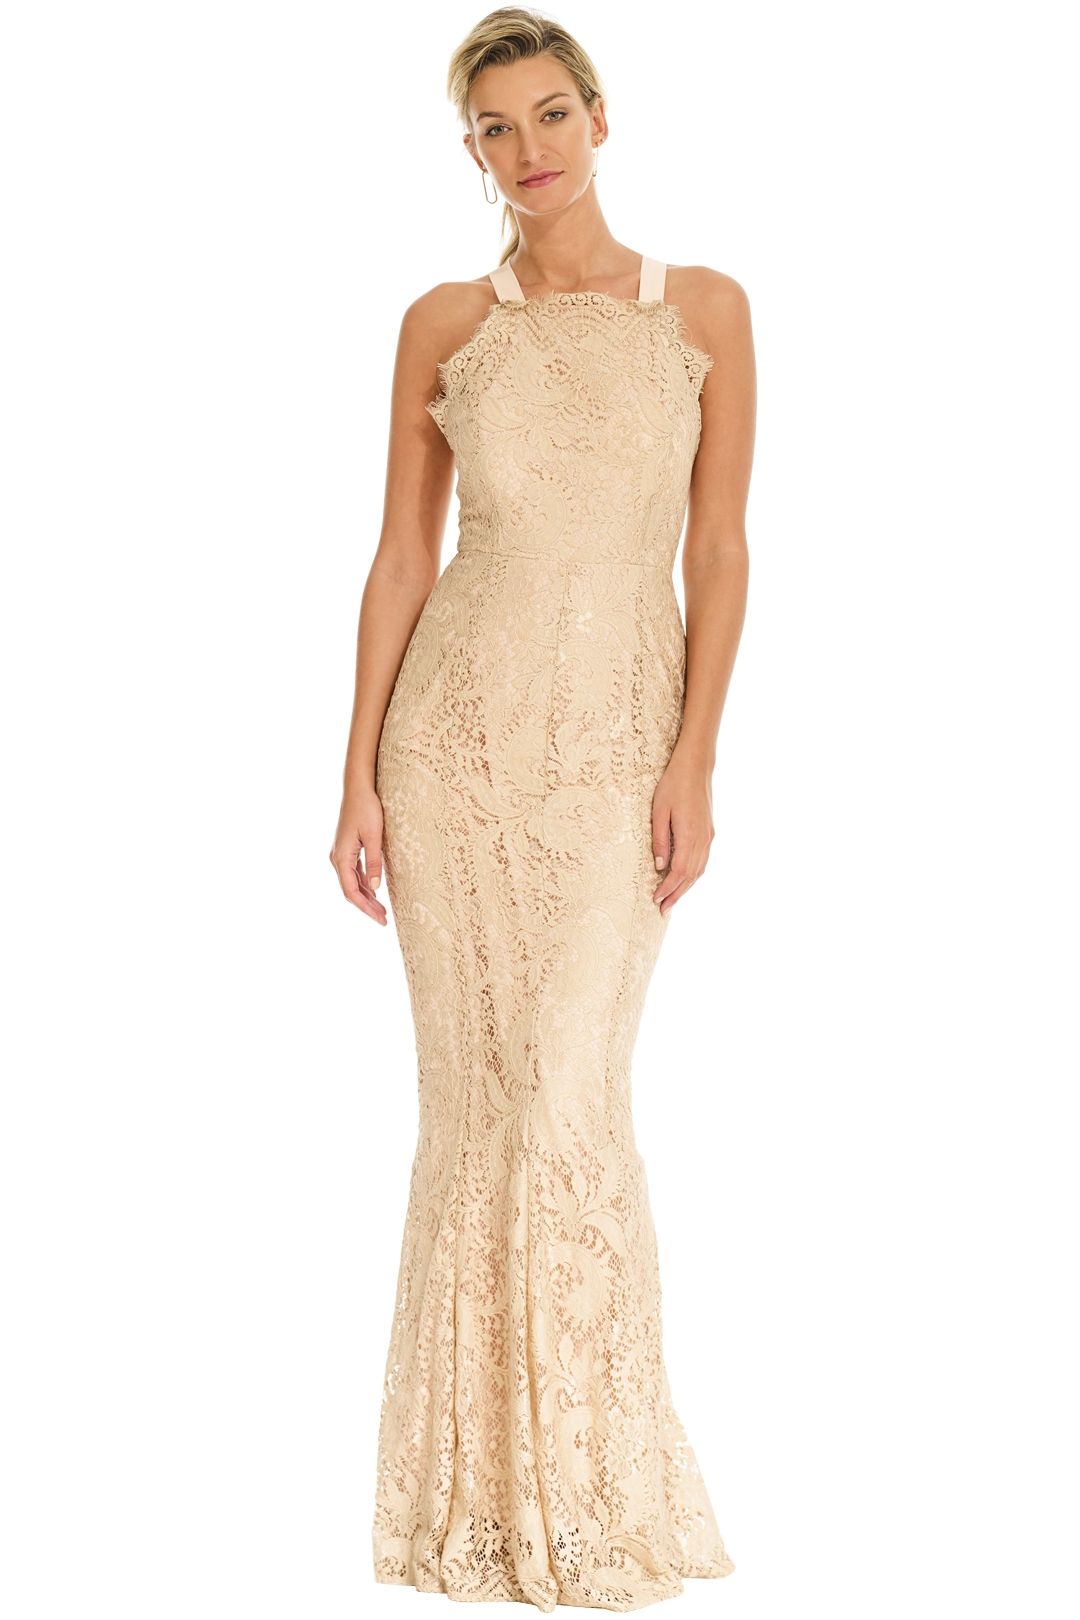 Grace and Hart - Mystic Lace Cross Back Gown - Nude - Front